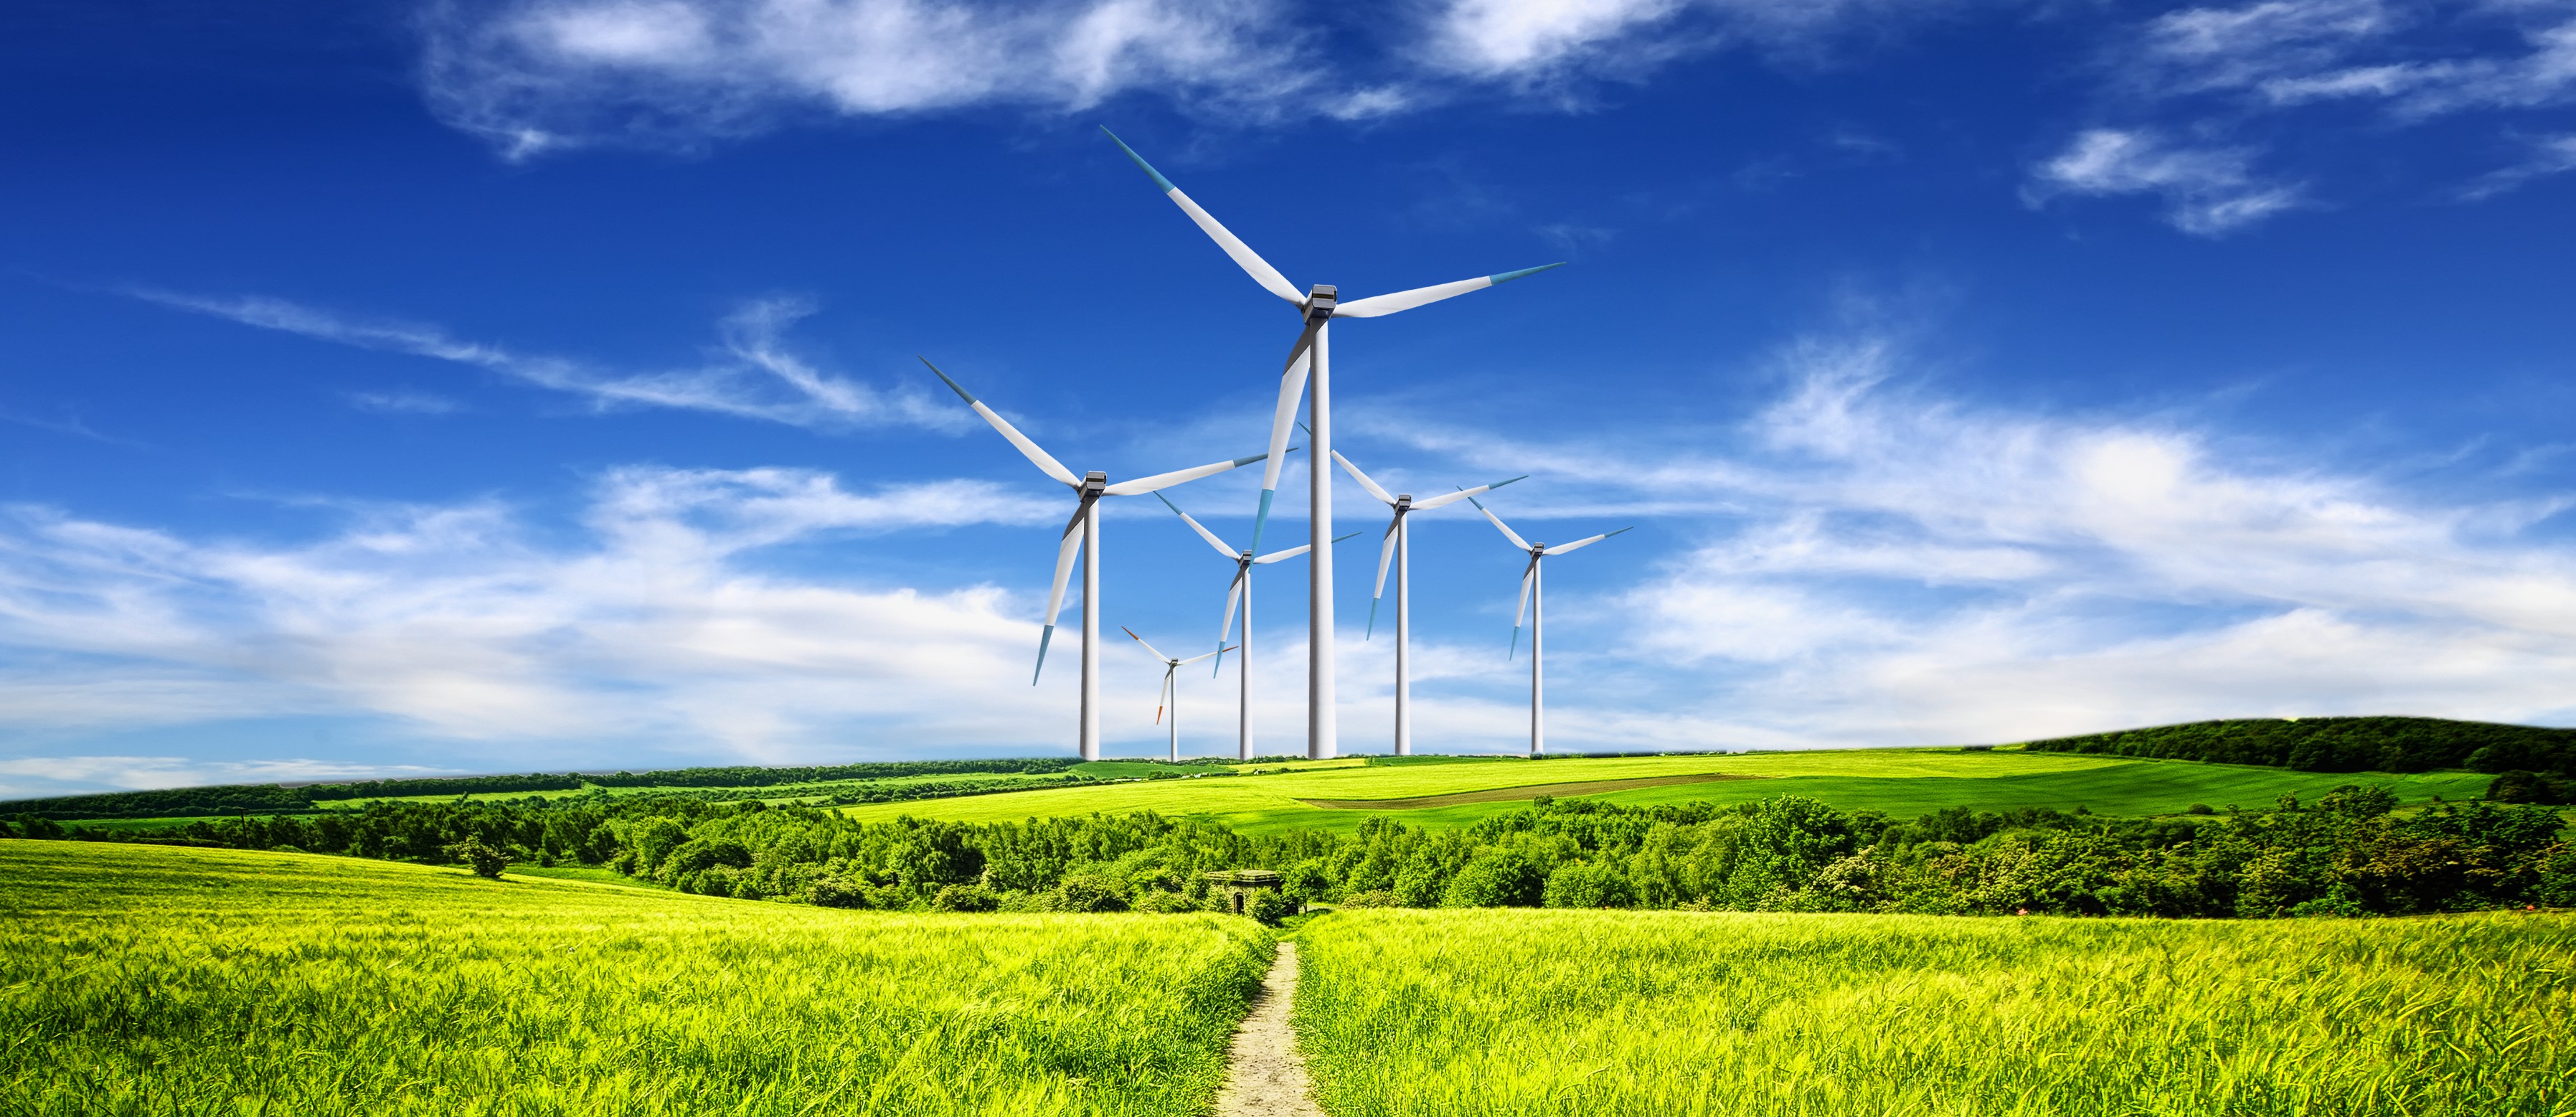 New industries can feast on volatile wind, solar: Q&A